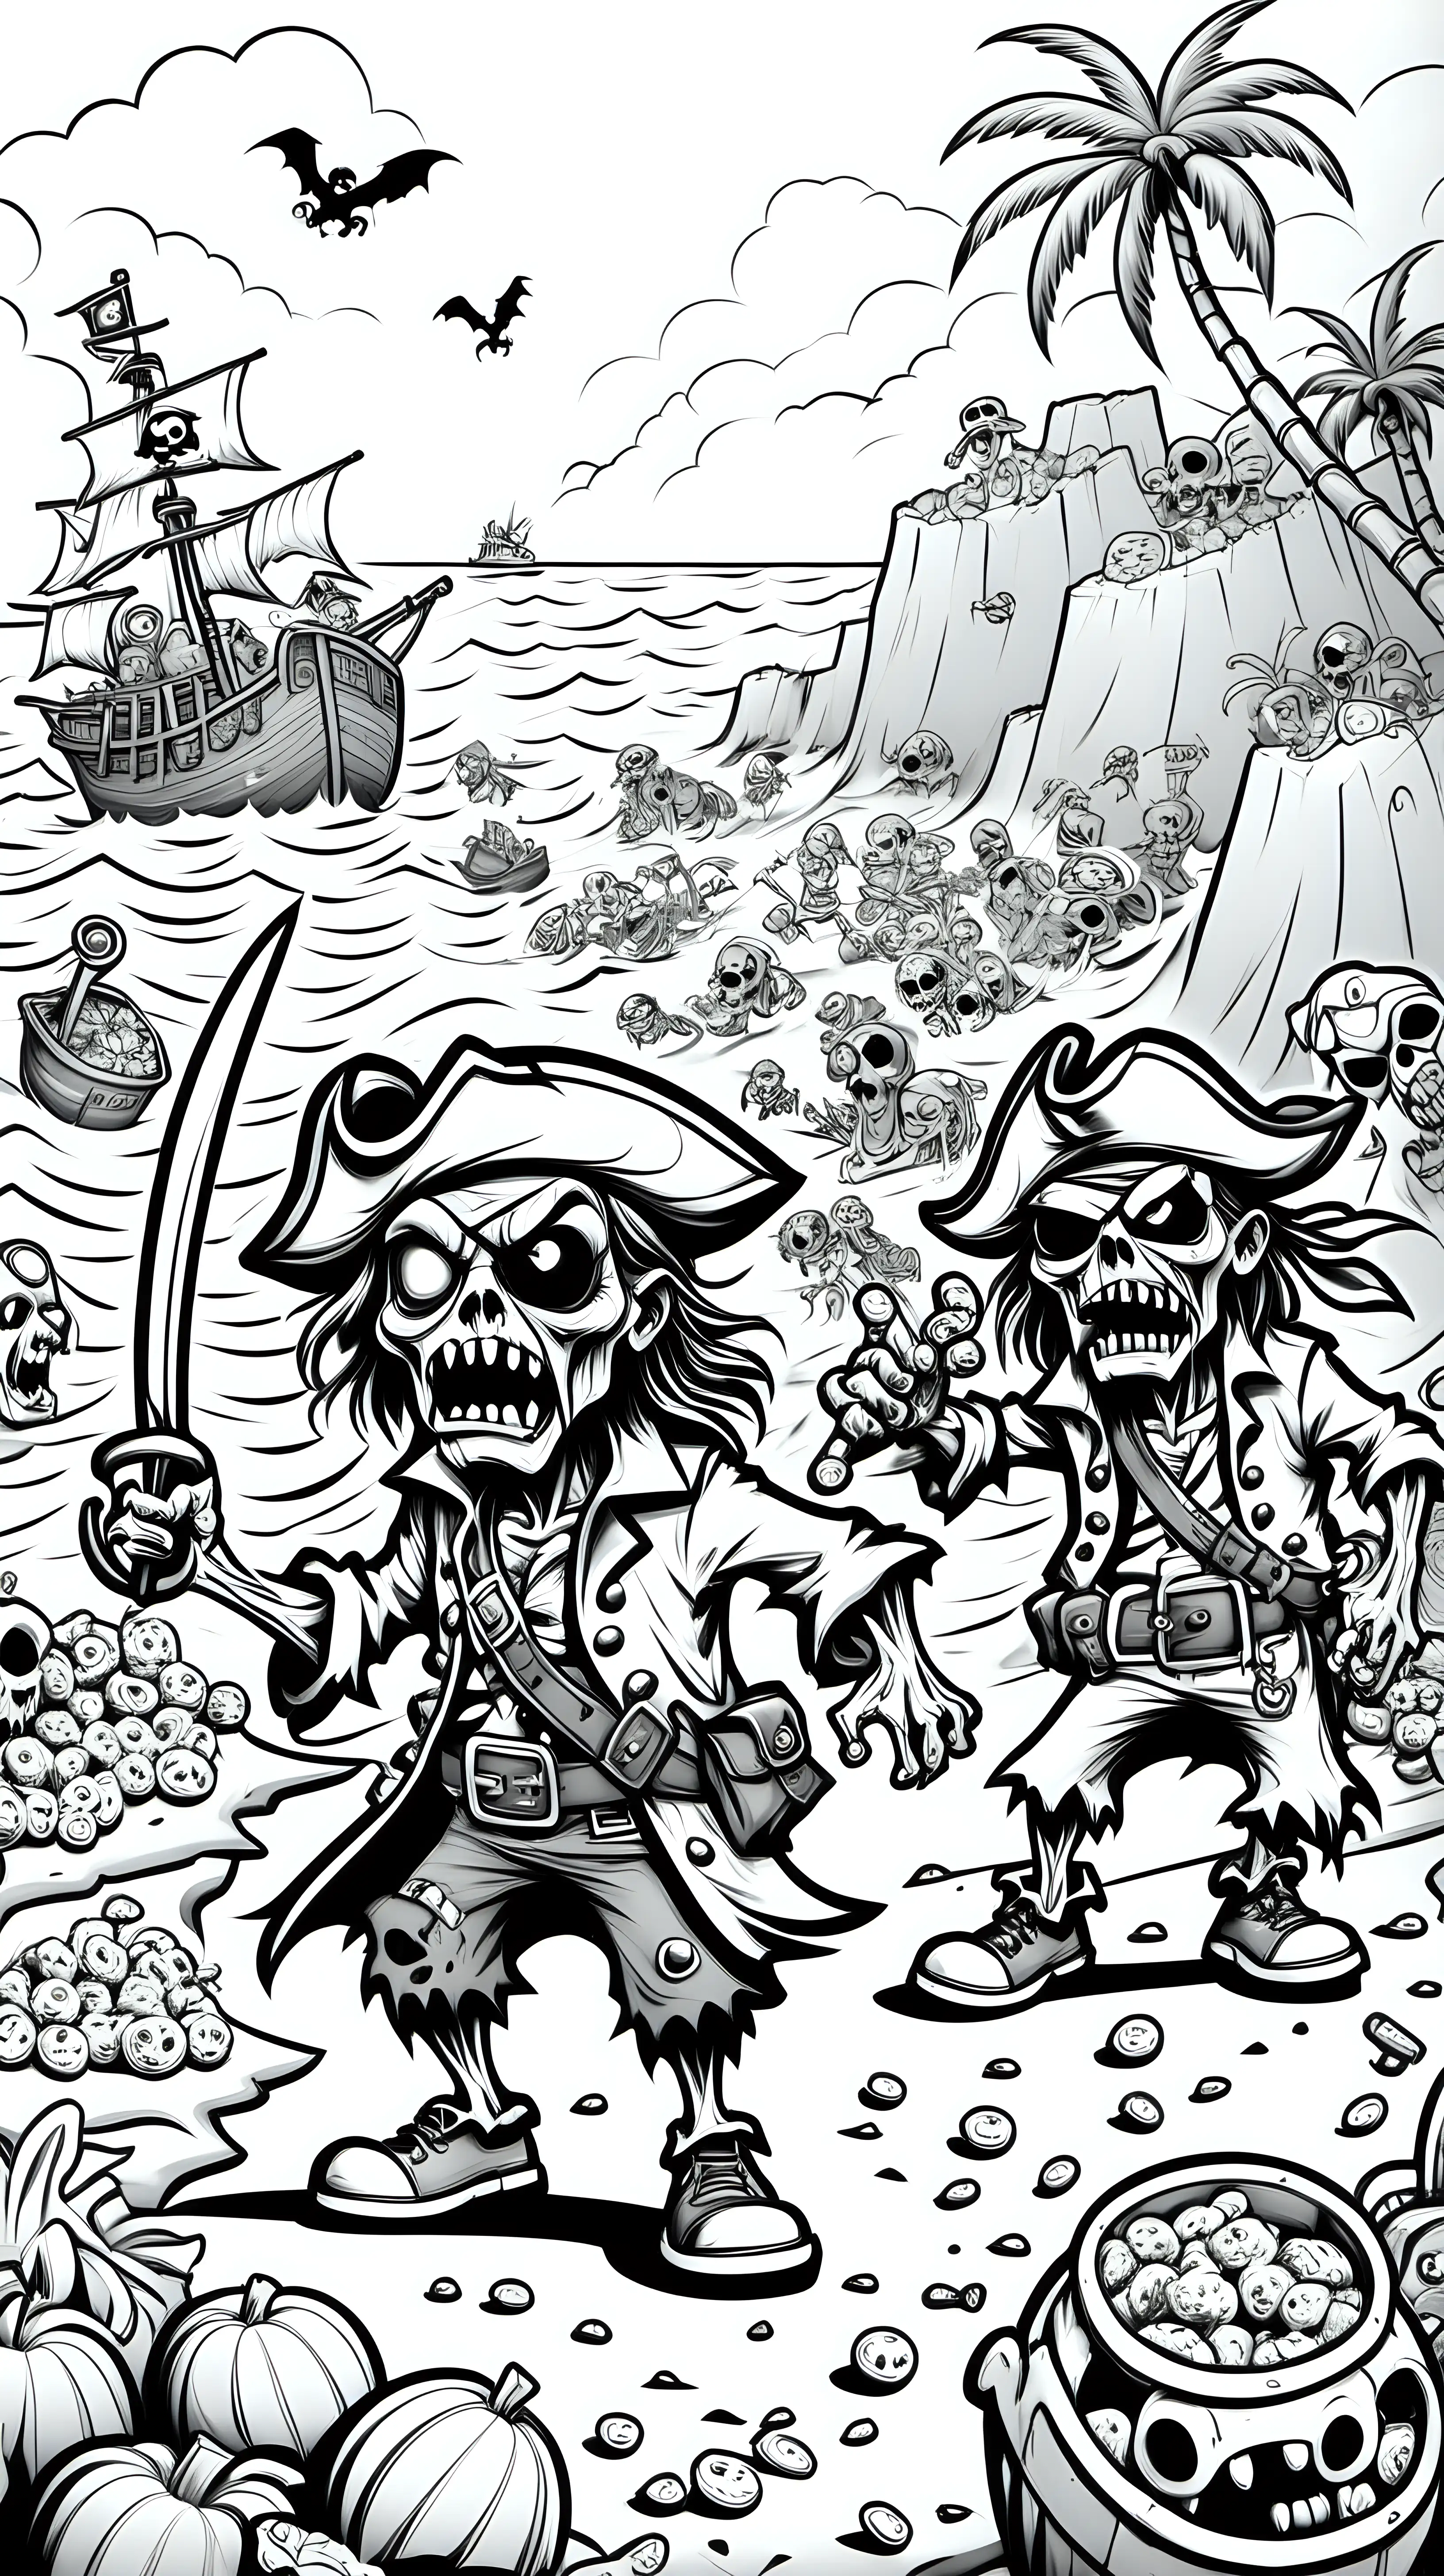 coloring book image, black and white image, of cartoon cute funny zombie pirates looking for candy treasure, island epic background